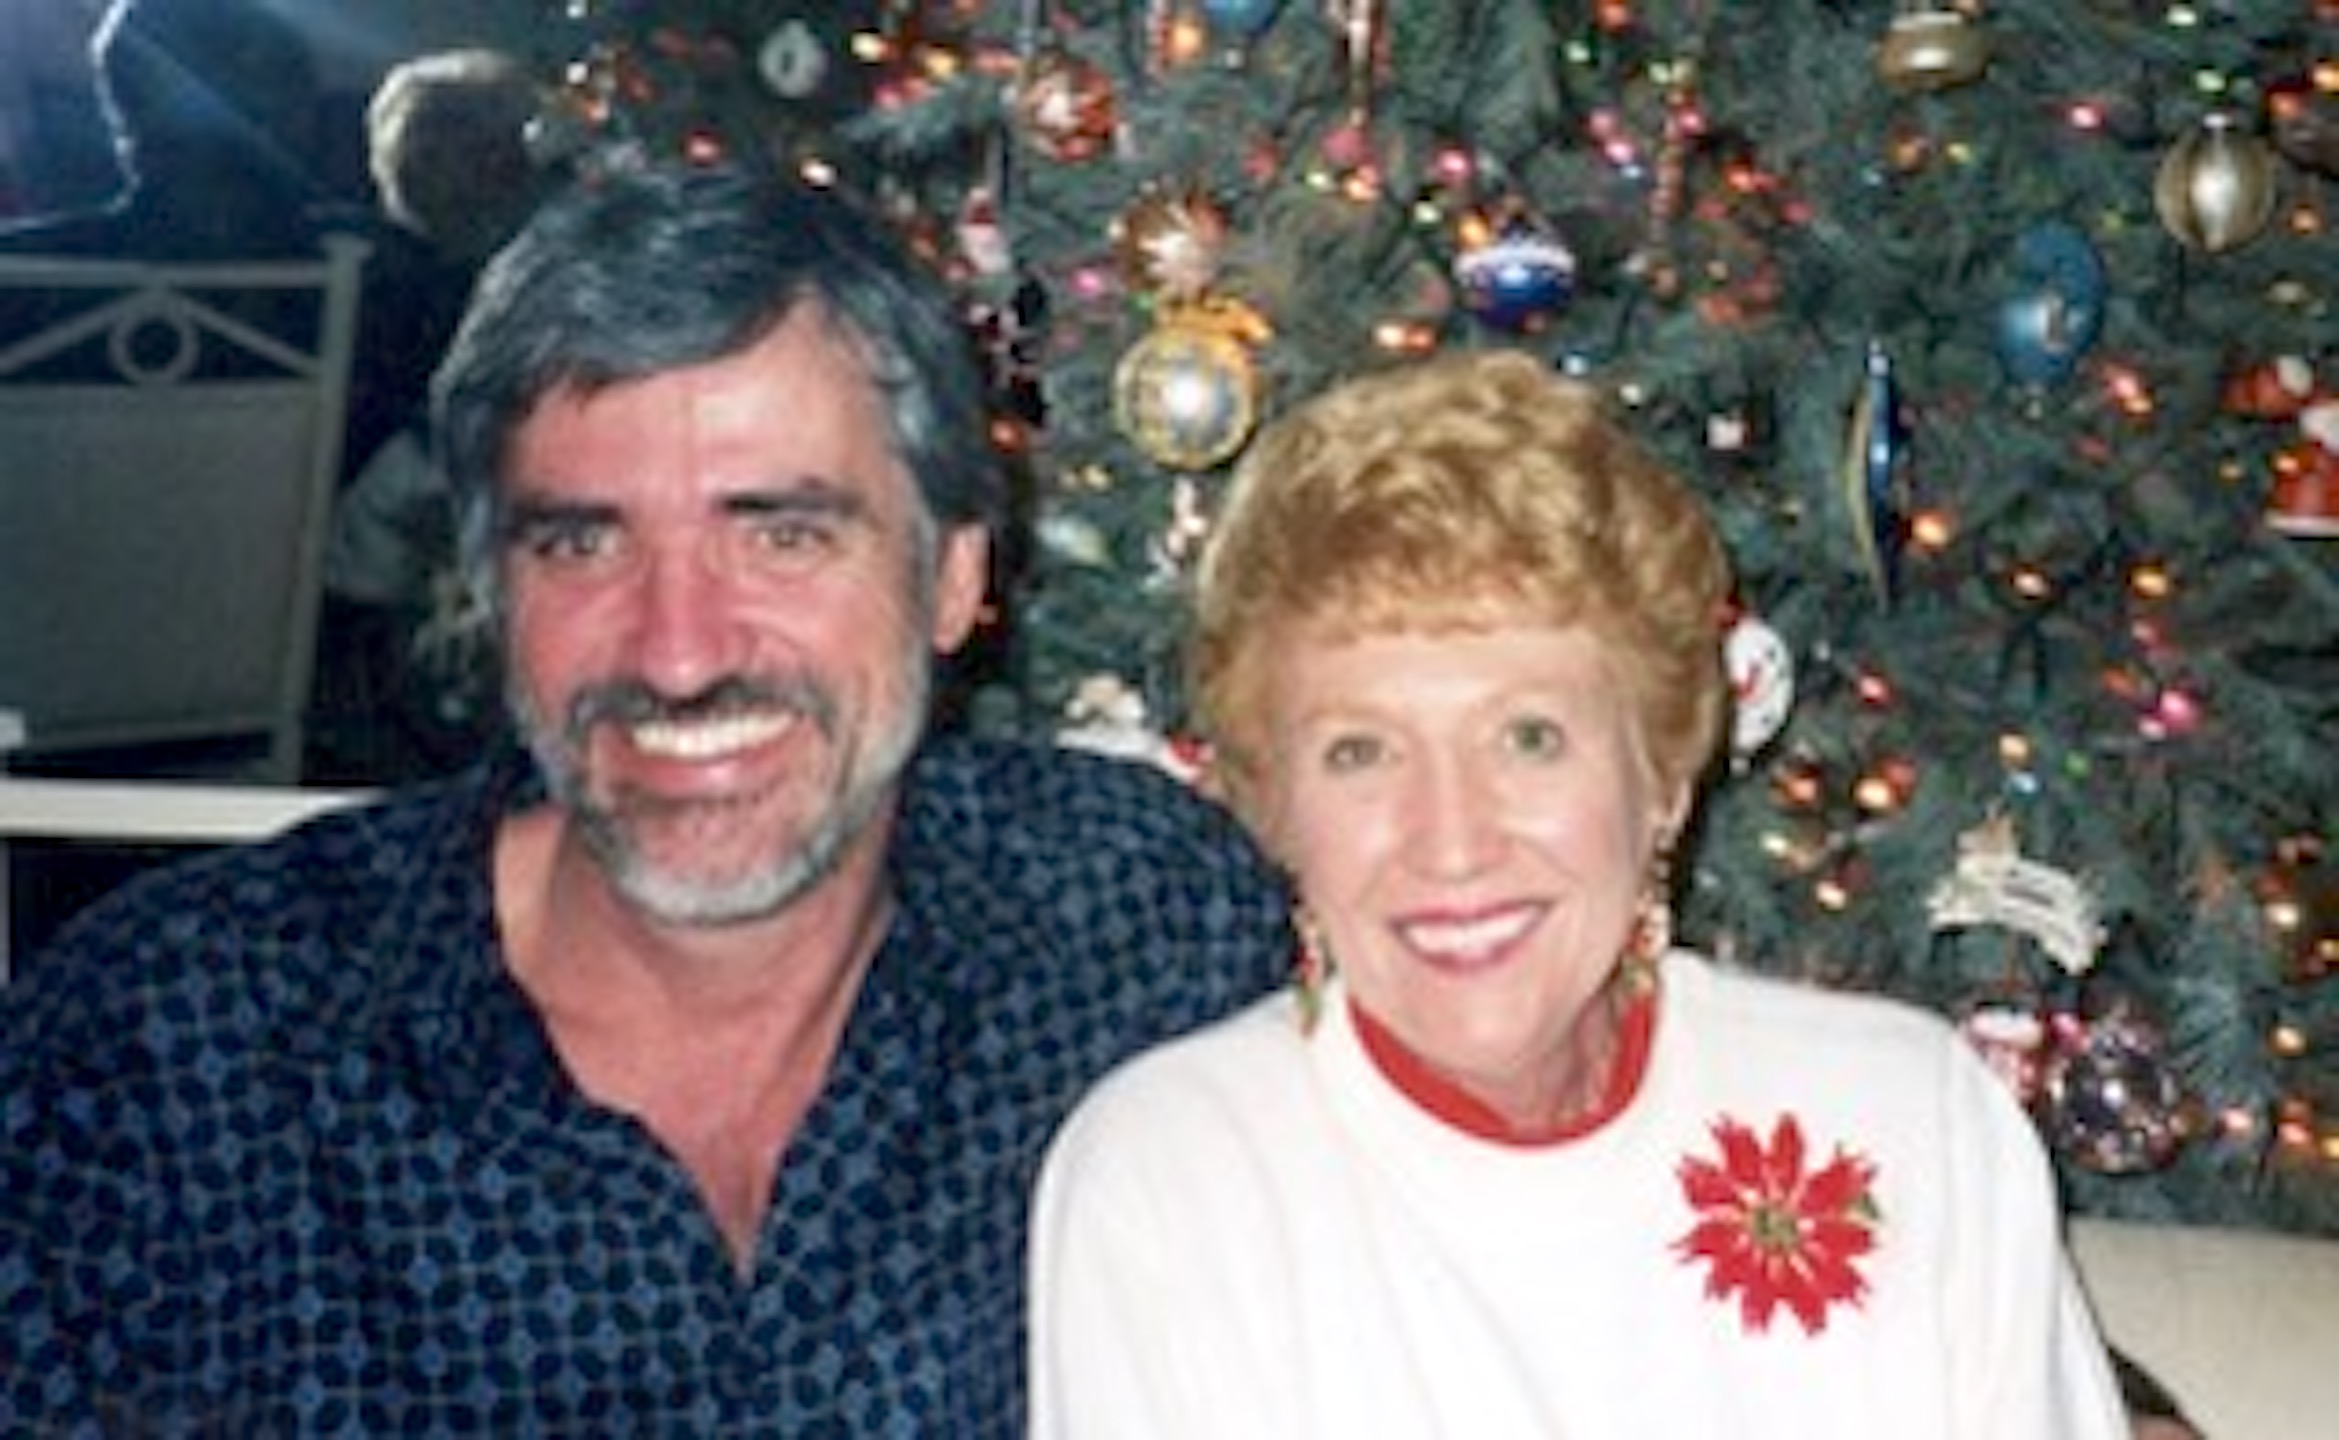 Ron Vanscoyk with his mother on Christmas.